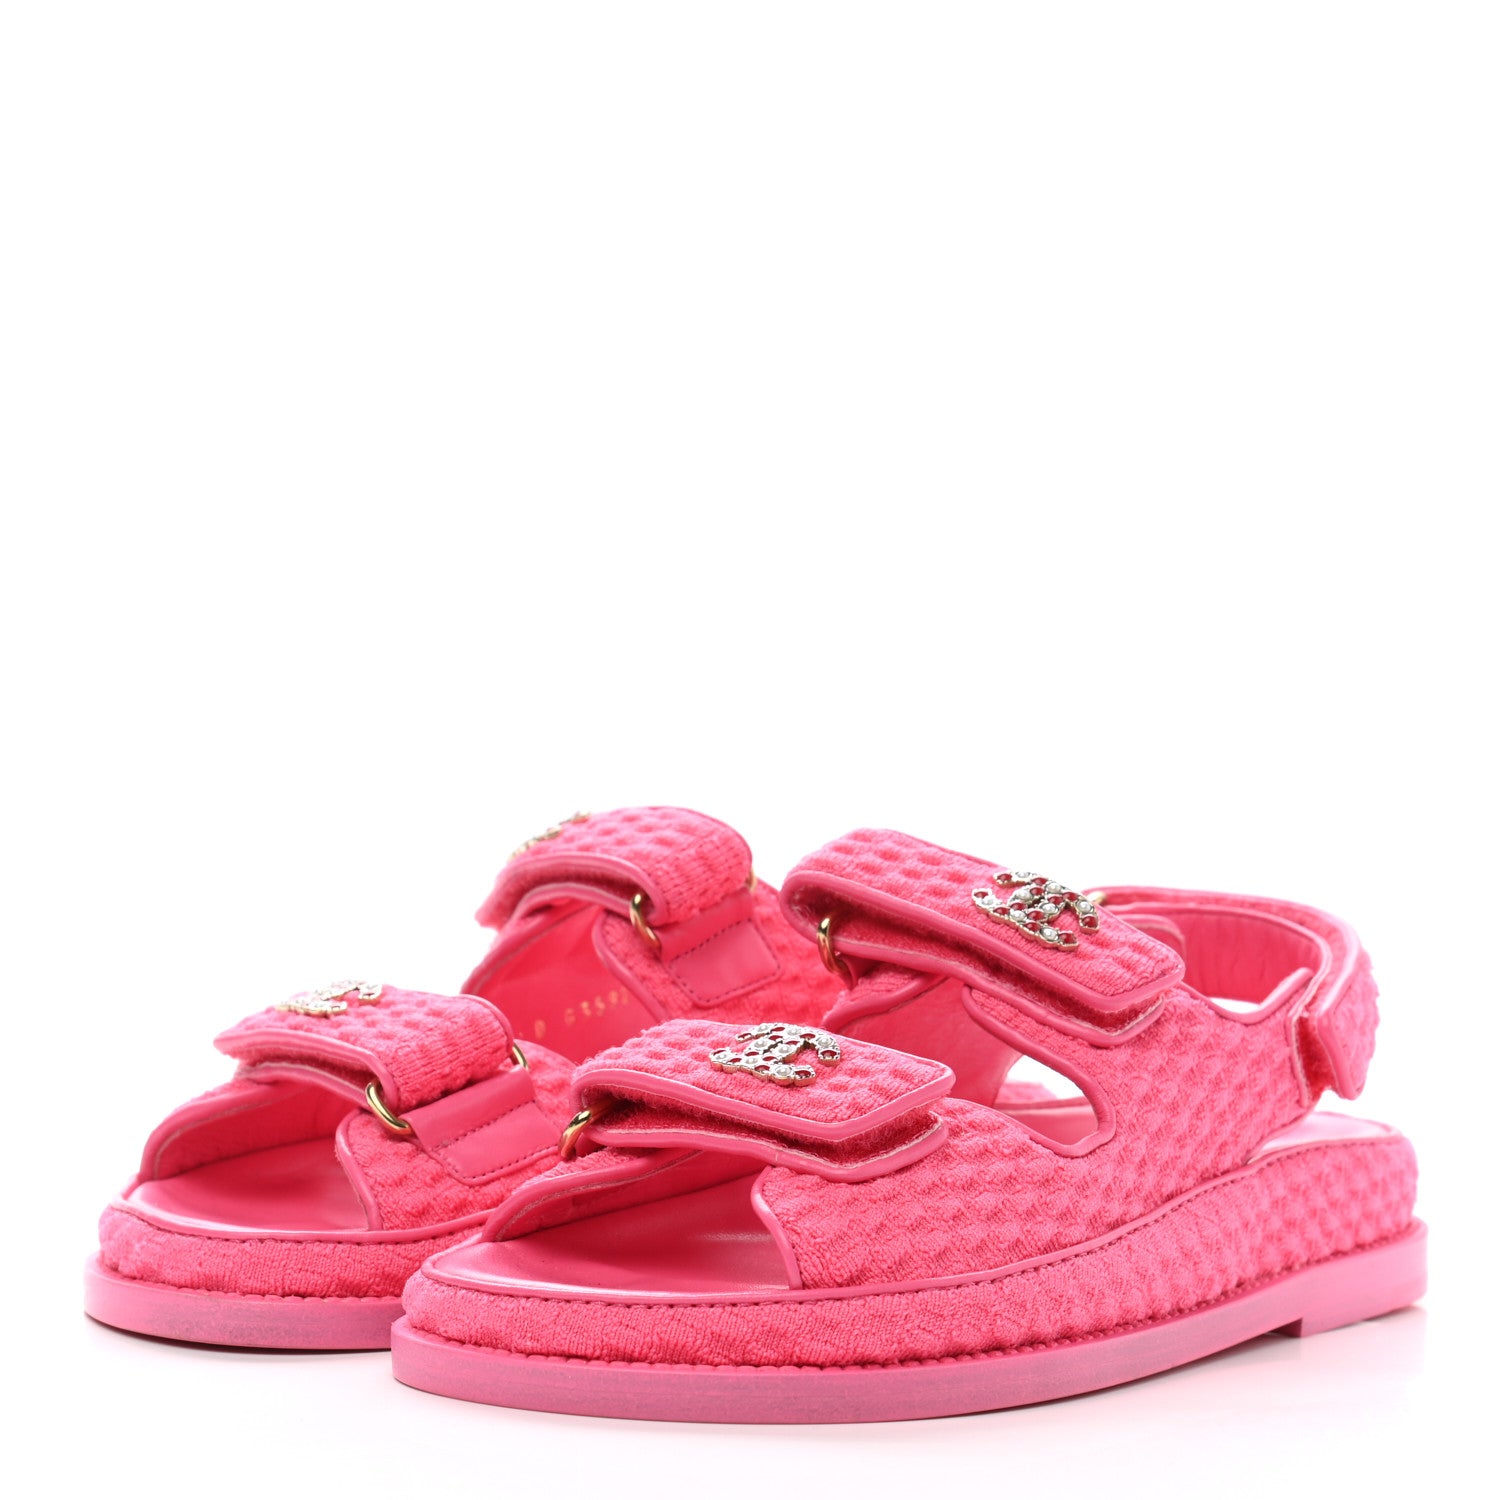 CHANEL Knit Fabric Velcro Dad Sandals